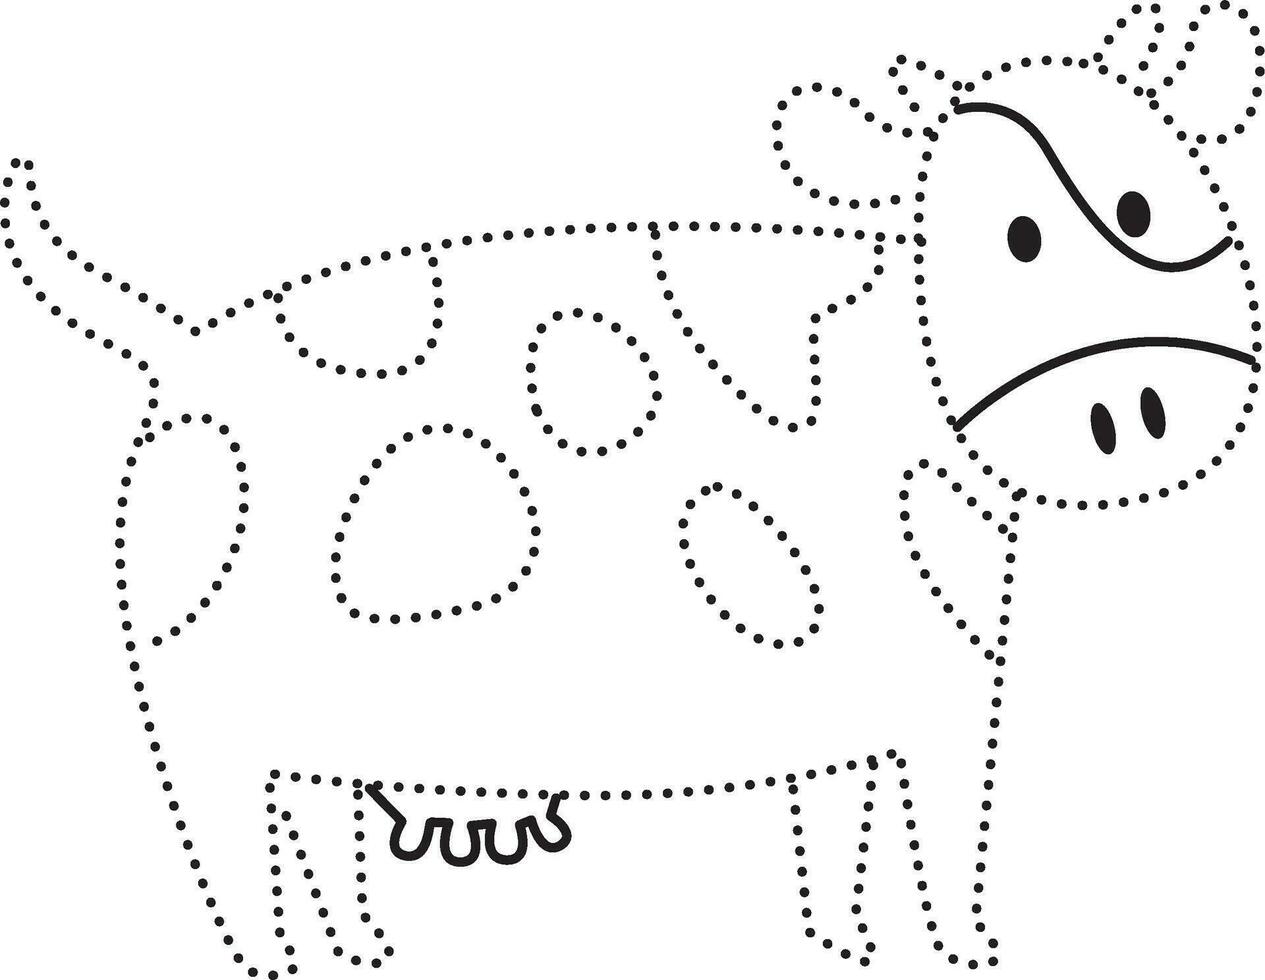 cow animal dotted line practice draw cartoon doodle kawaii anime coloring page cute illustration drawing clip art character chibi manga comic vector